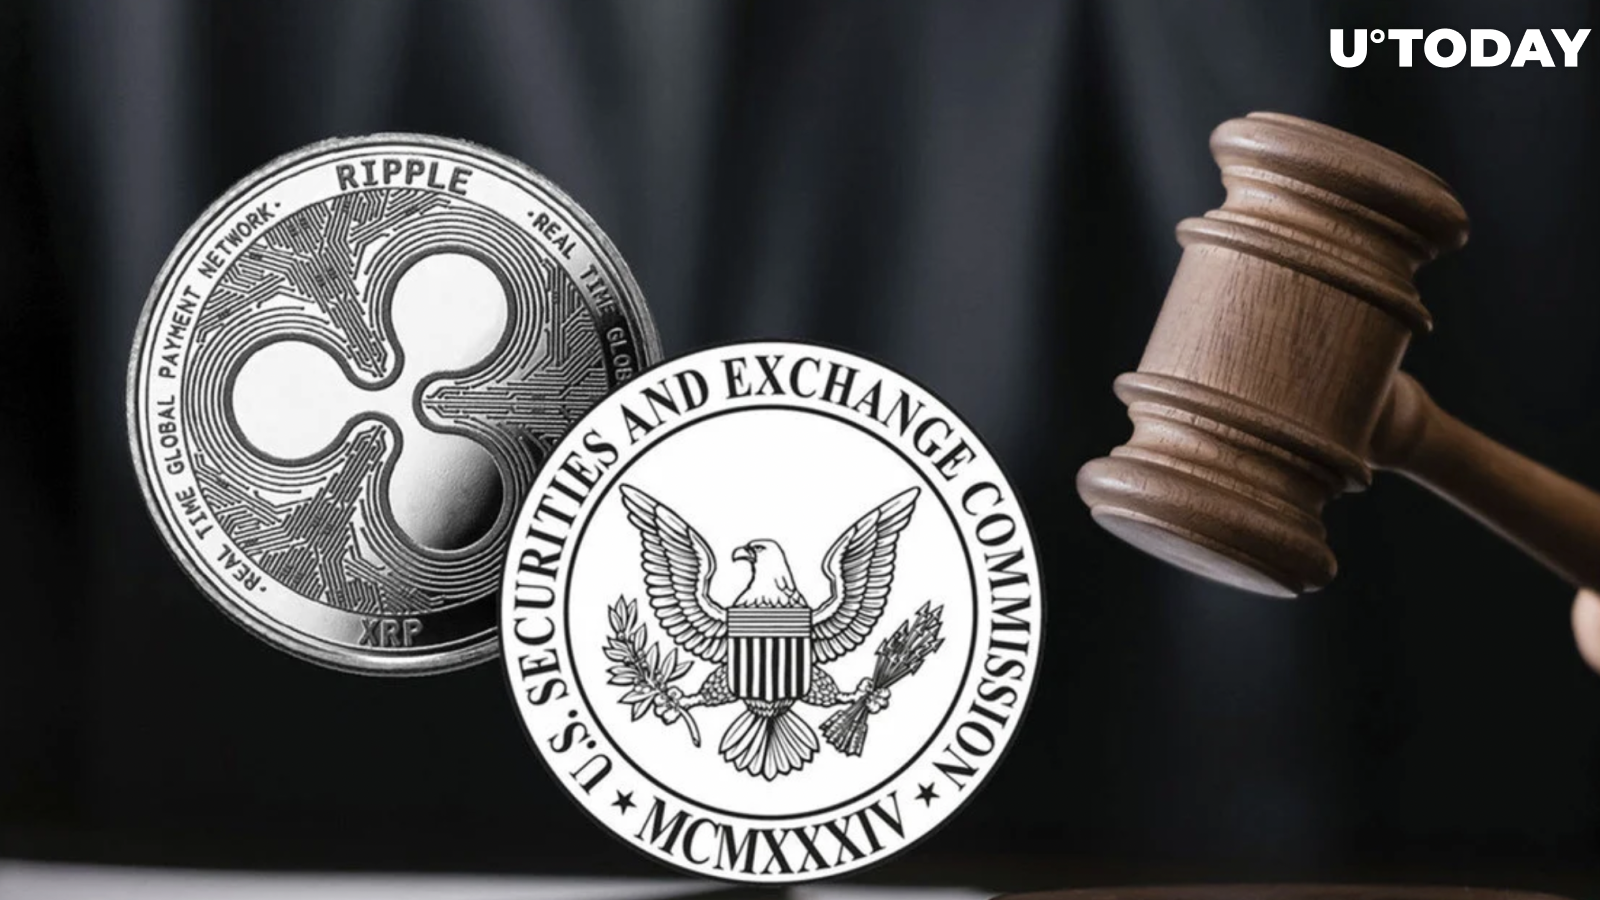 Ripple-SEC Meeting That Could Change Everything: Will It Actually Happen? 